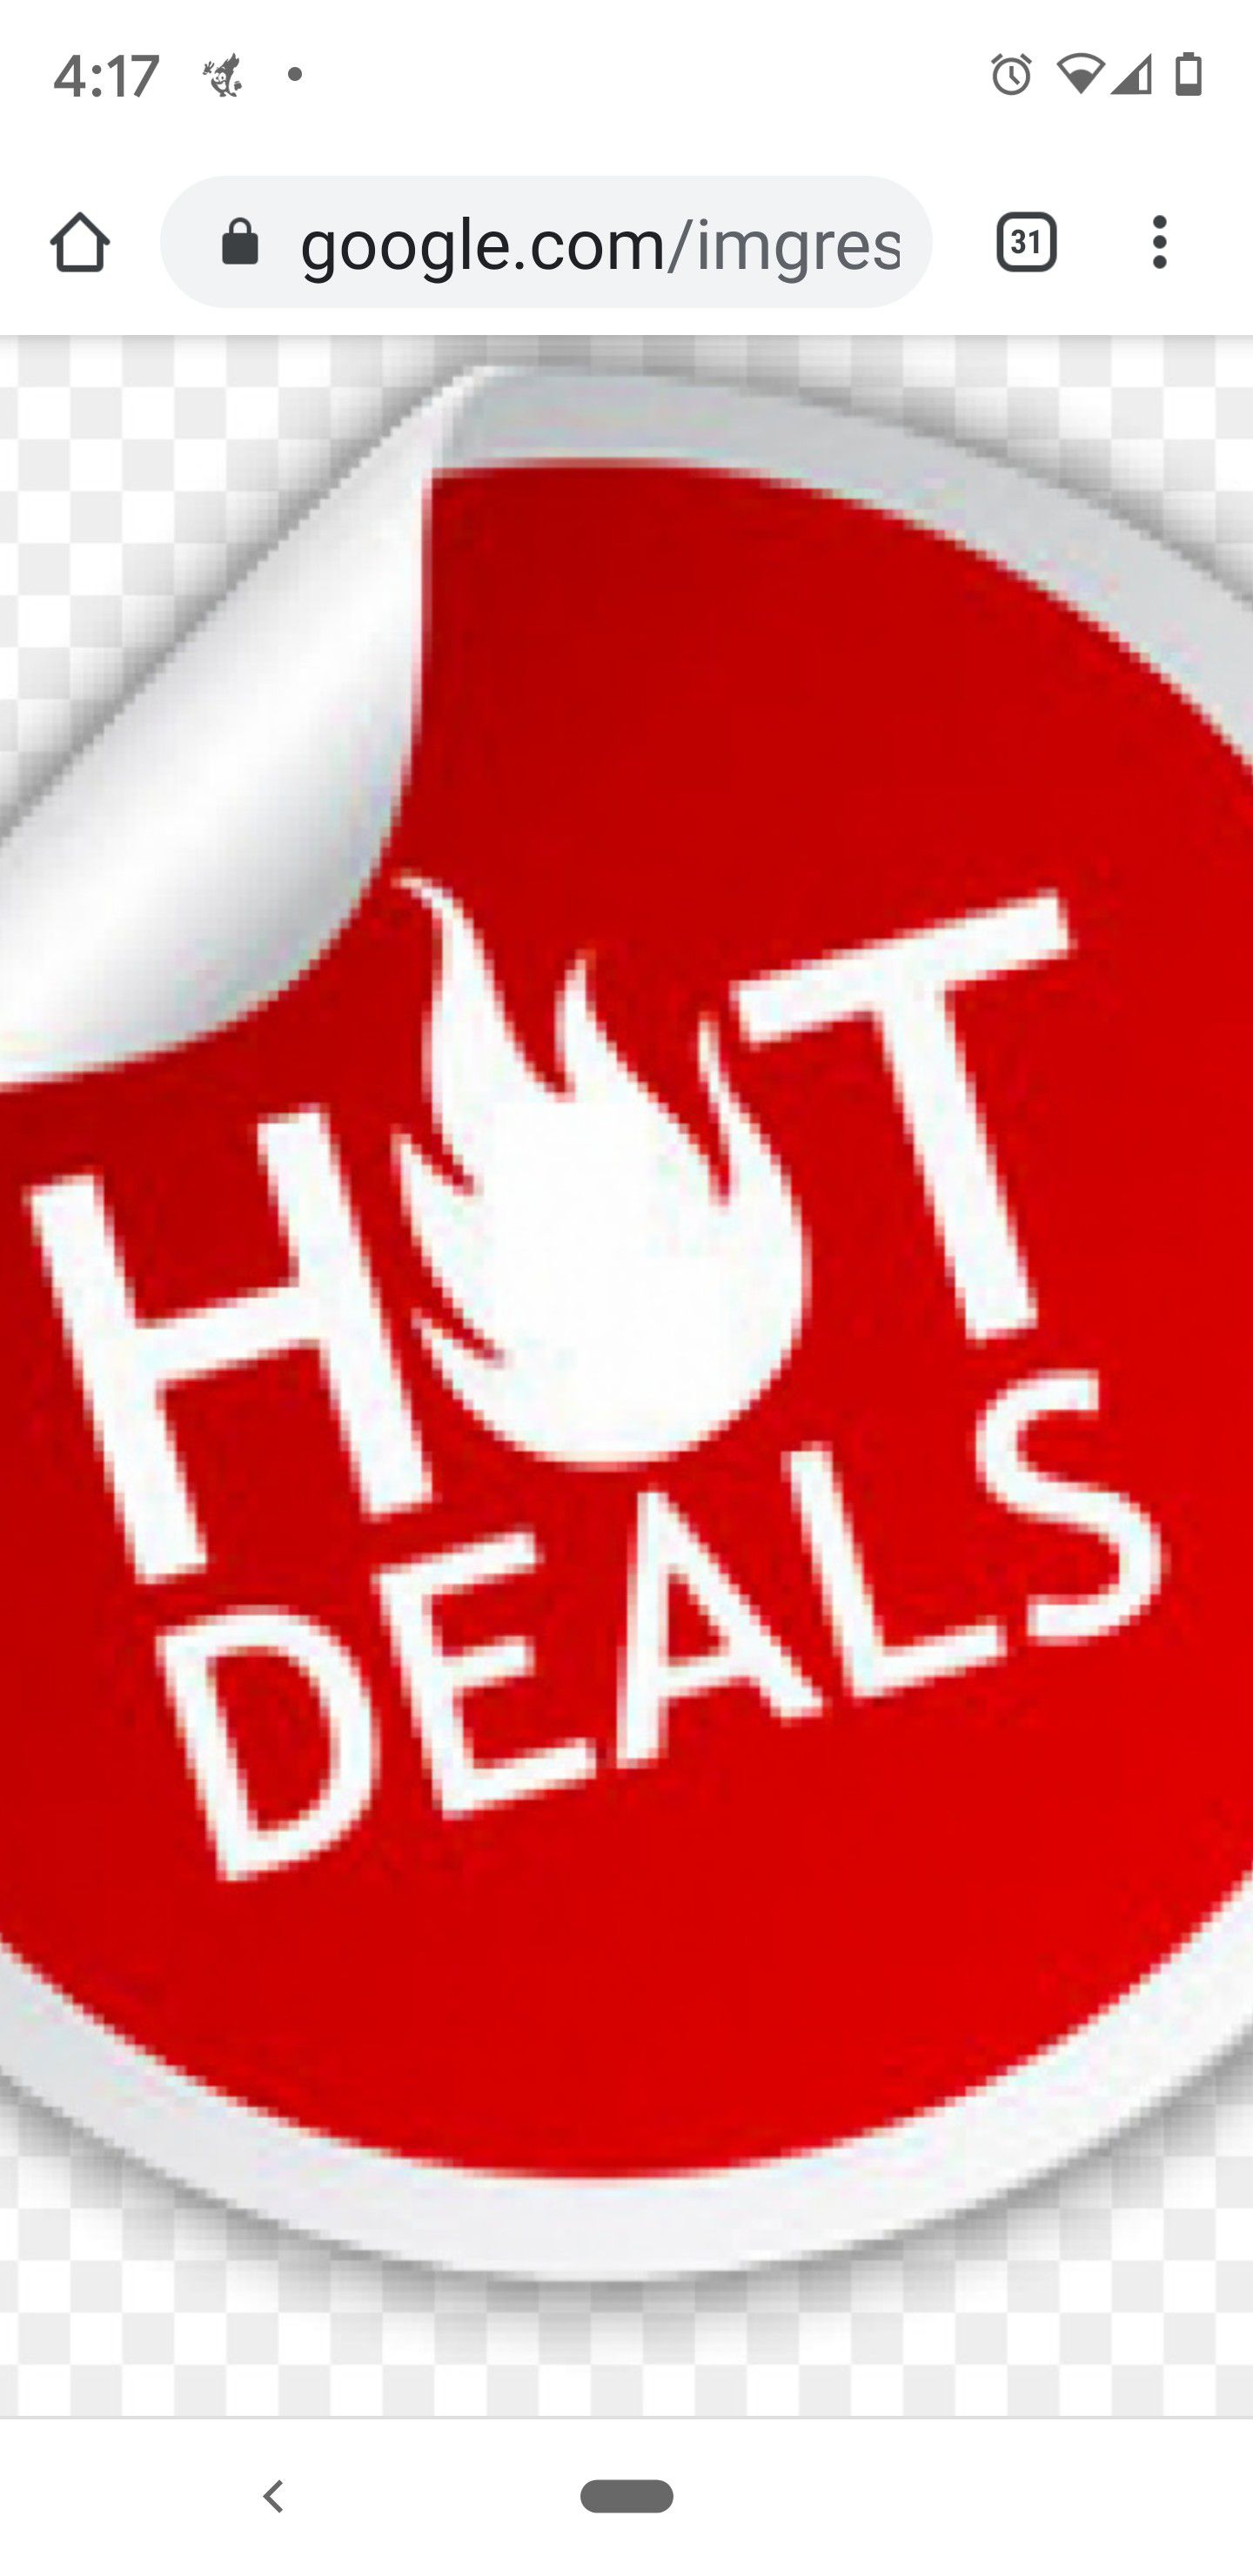 CHECK OUT MY HOT DEALS . CLICK ON MY NAME AND LOOK OVER MY INVENTORY